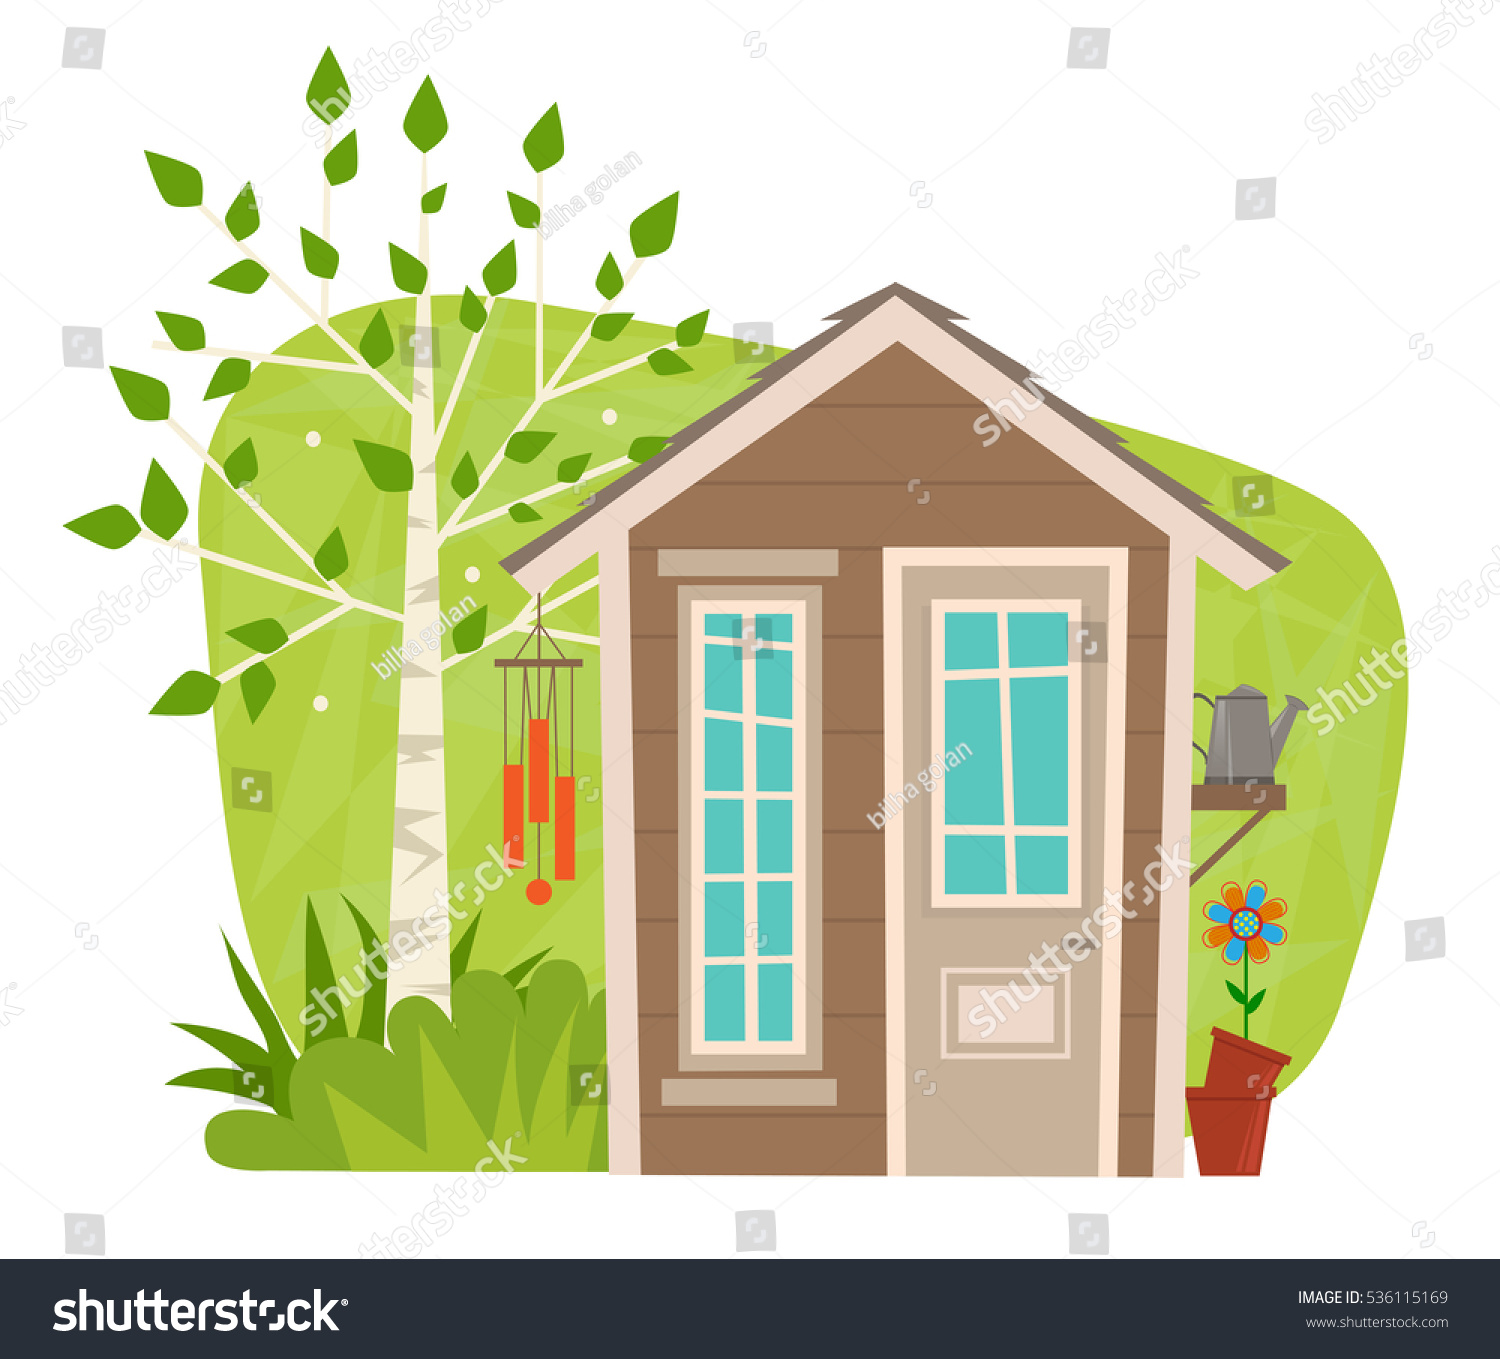 clipart garden shed - photo #16